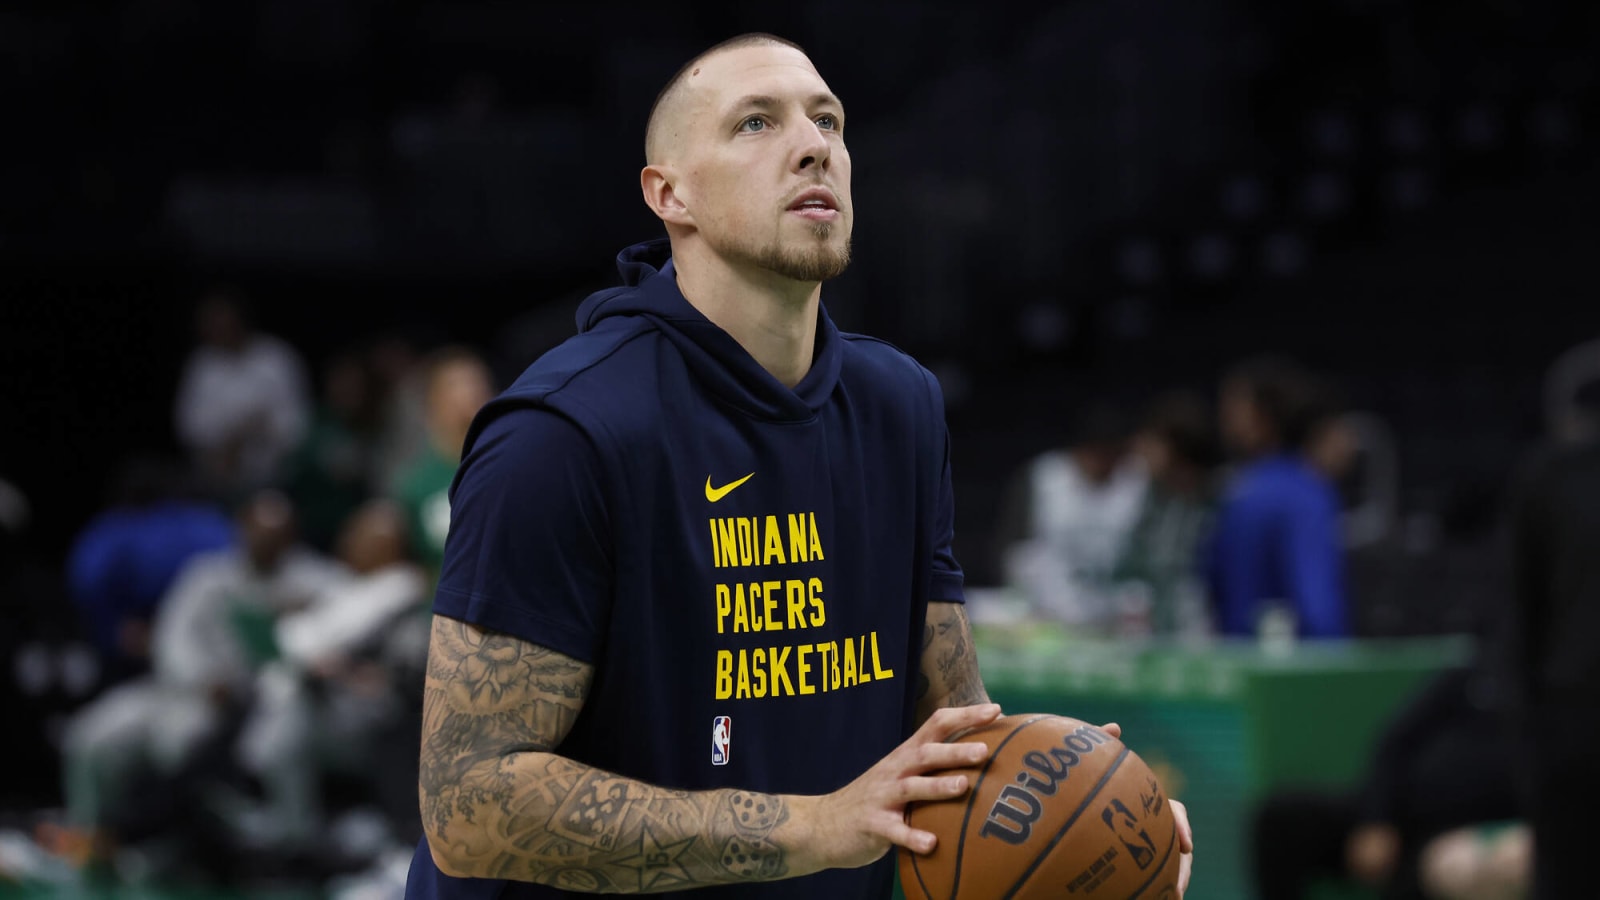 Daniel Theis expected to sign with Clippers following Pacers&#39; buyout